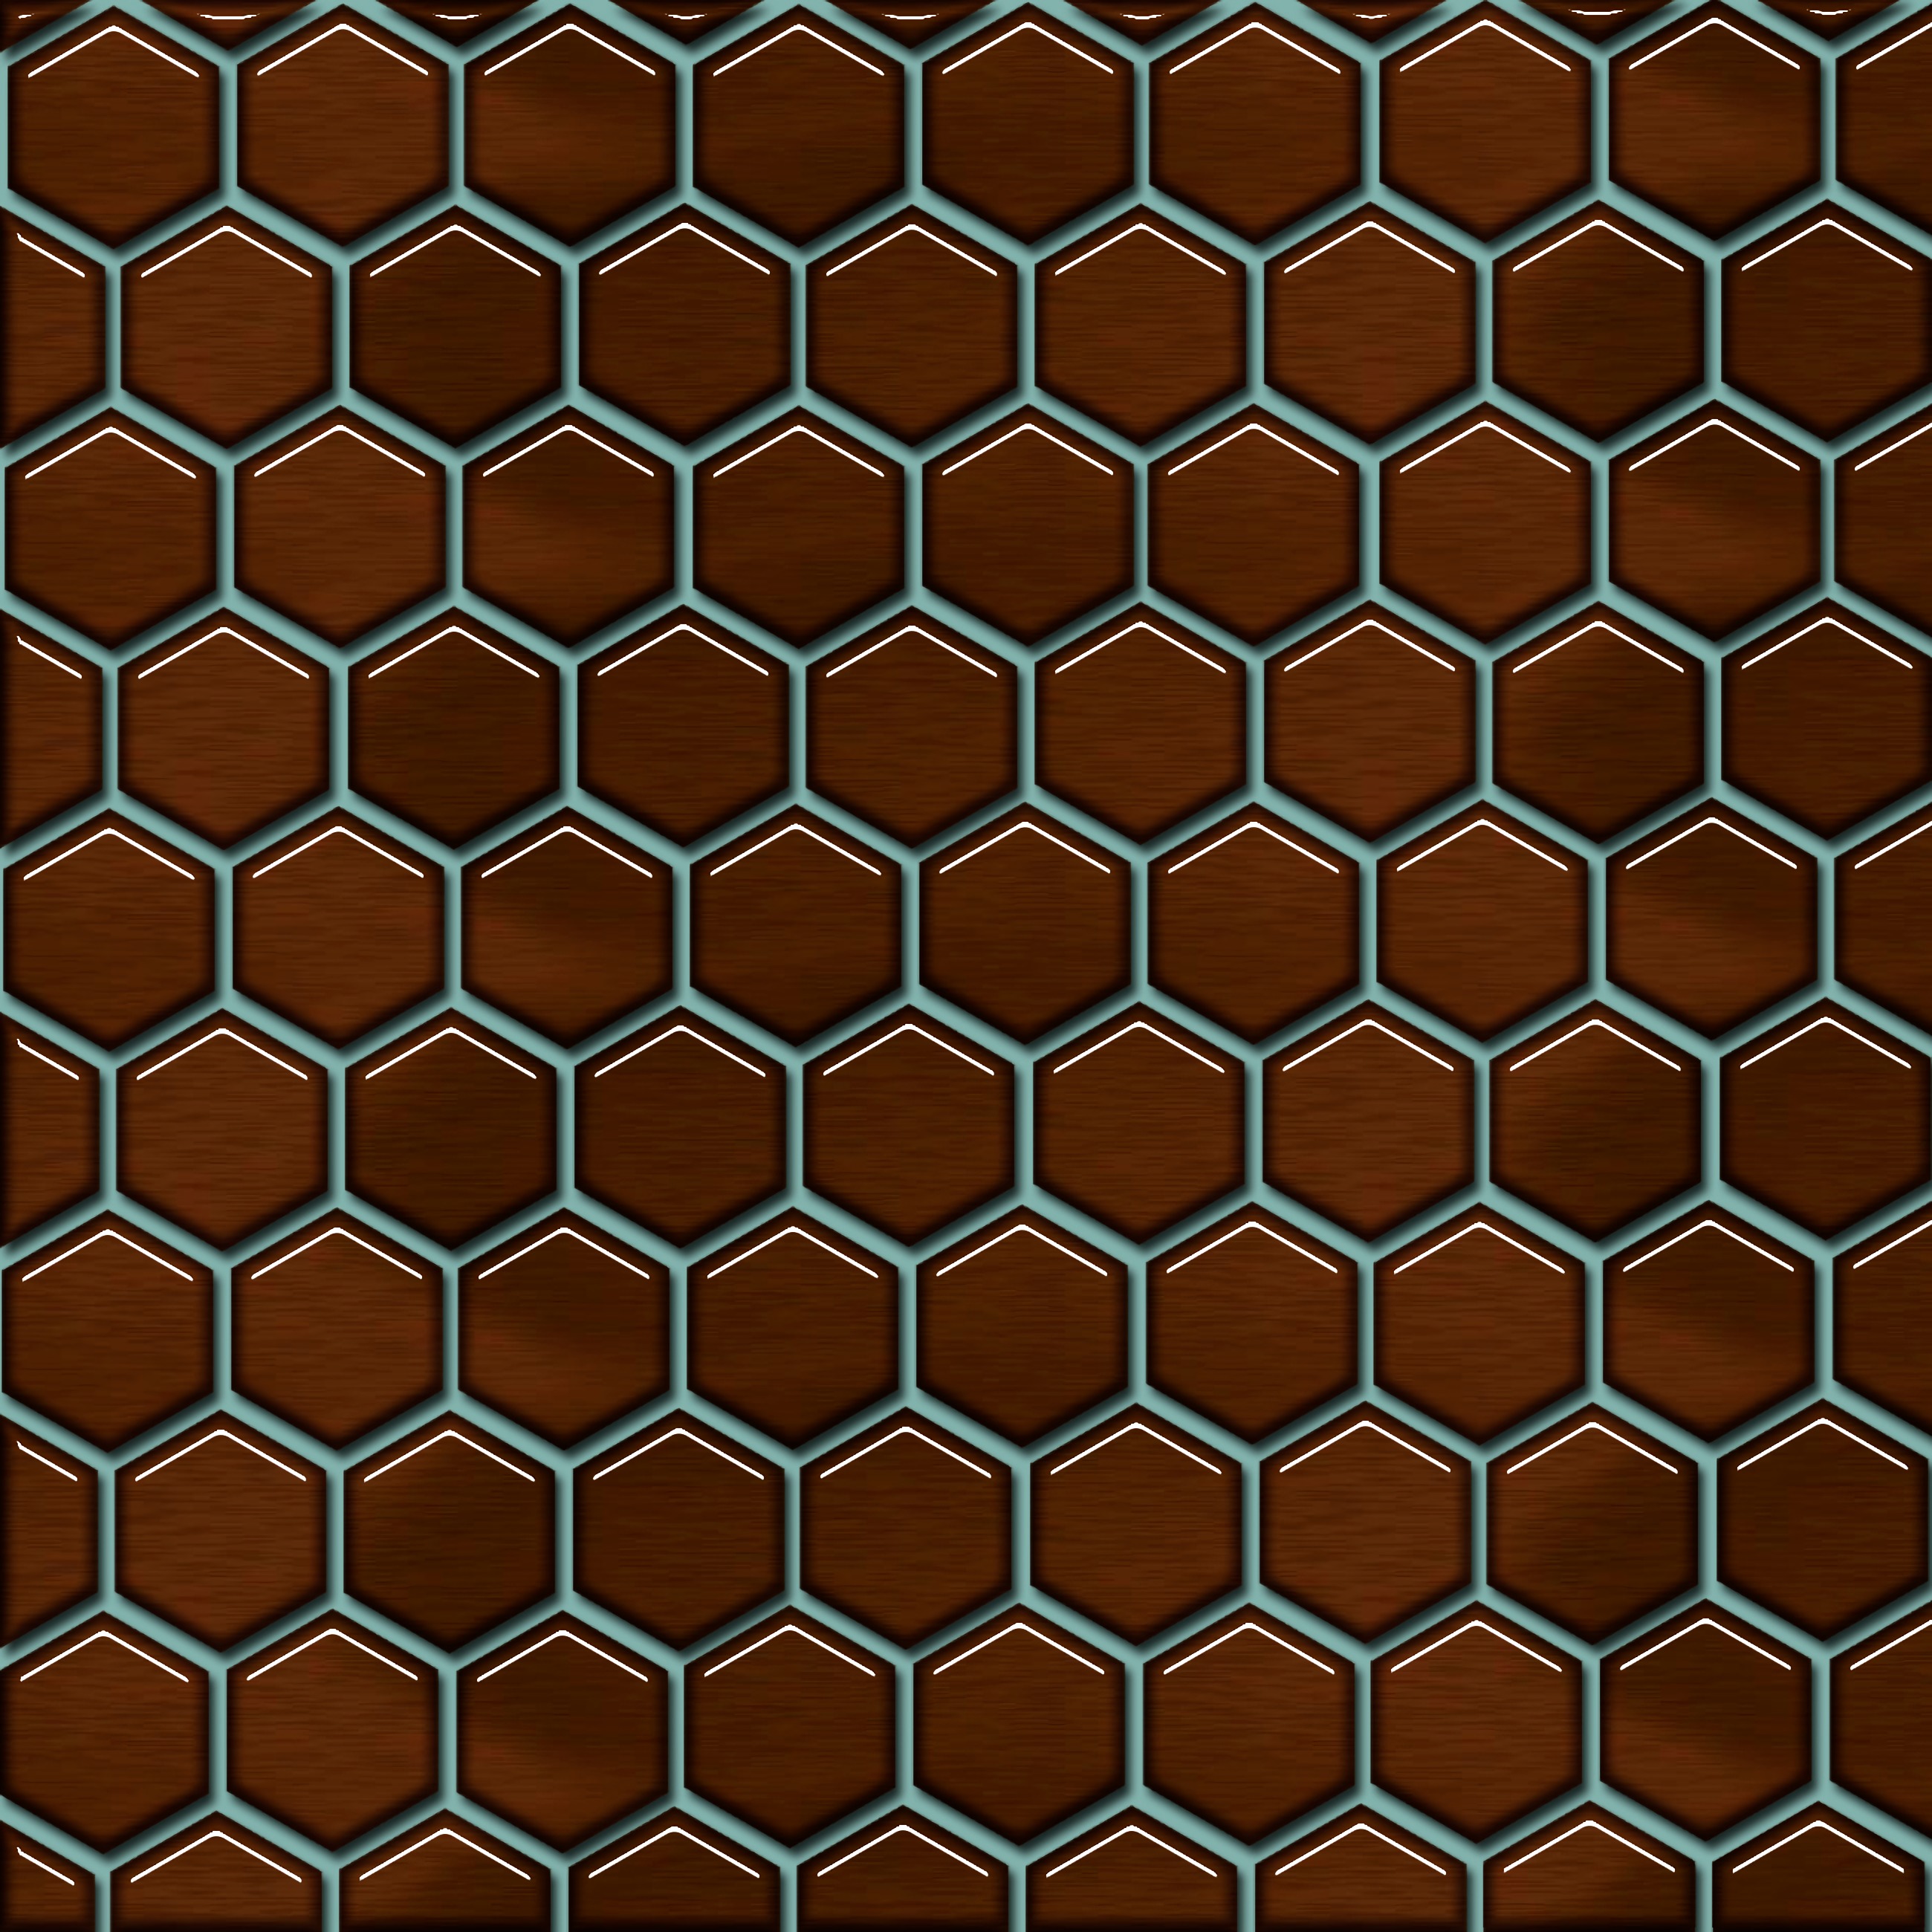 geometric, honeycomb, textures, pattern, texture, cells, cell